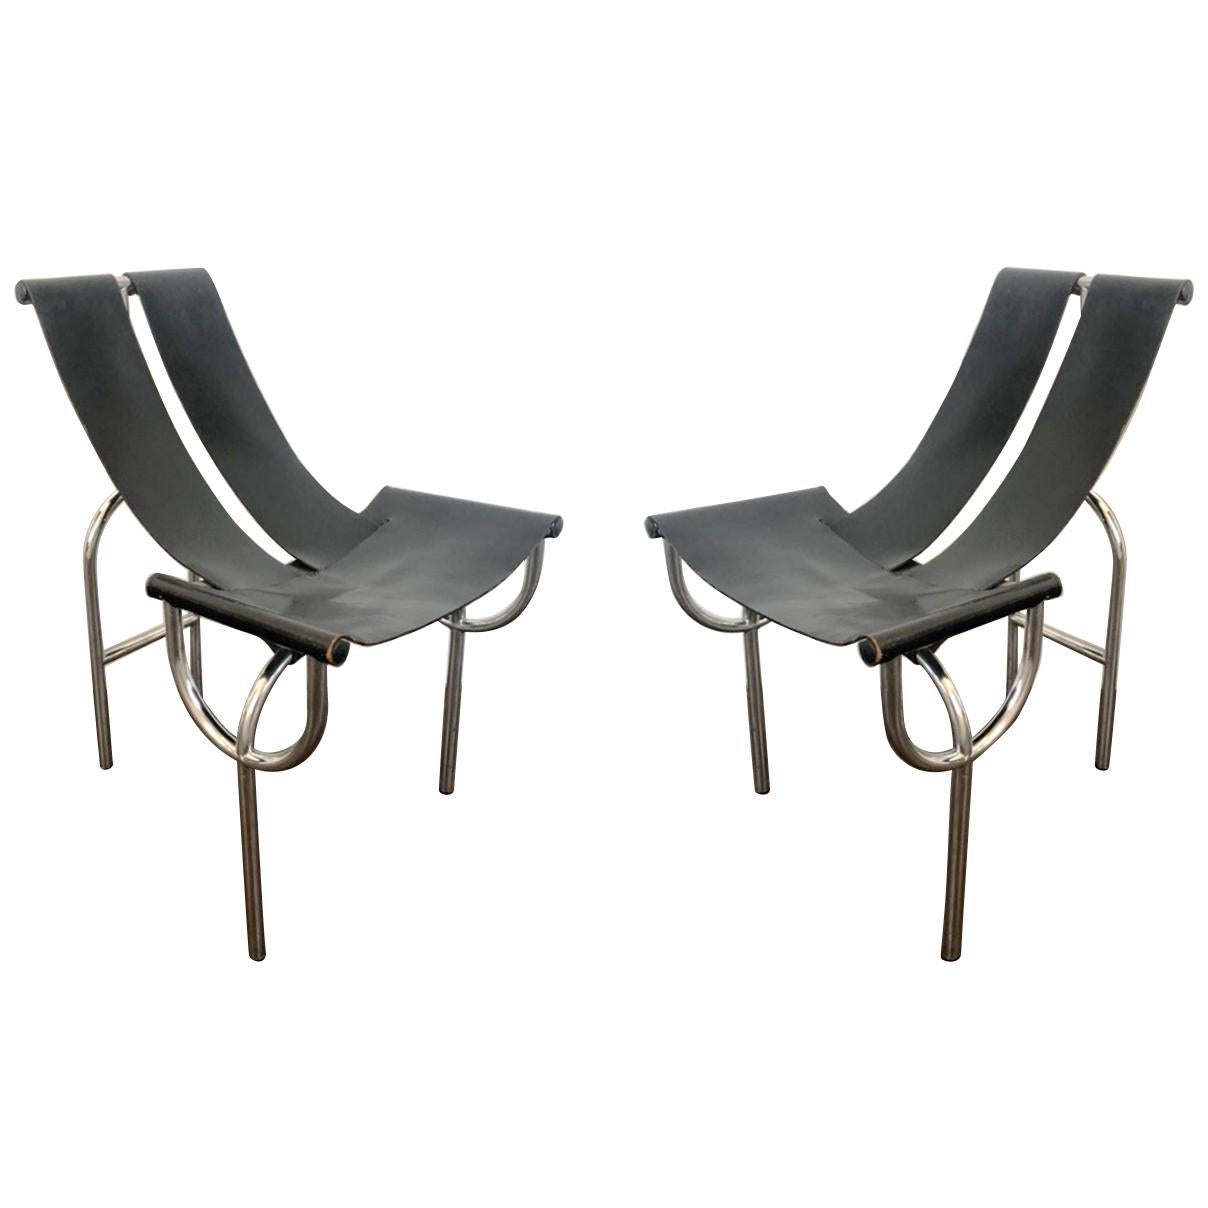 Pair of TRI 15 Chairs by Roberto Gabetti & AImaro Isola for Arbo, Italy, 1968 For Sale